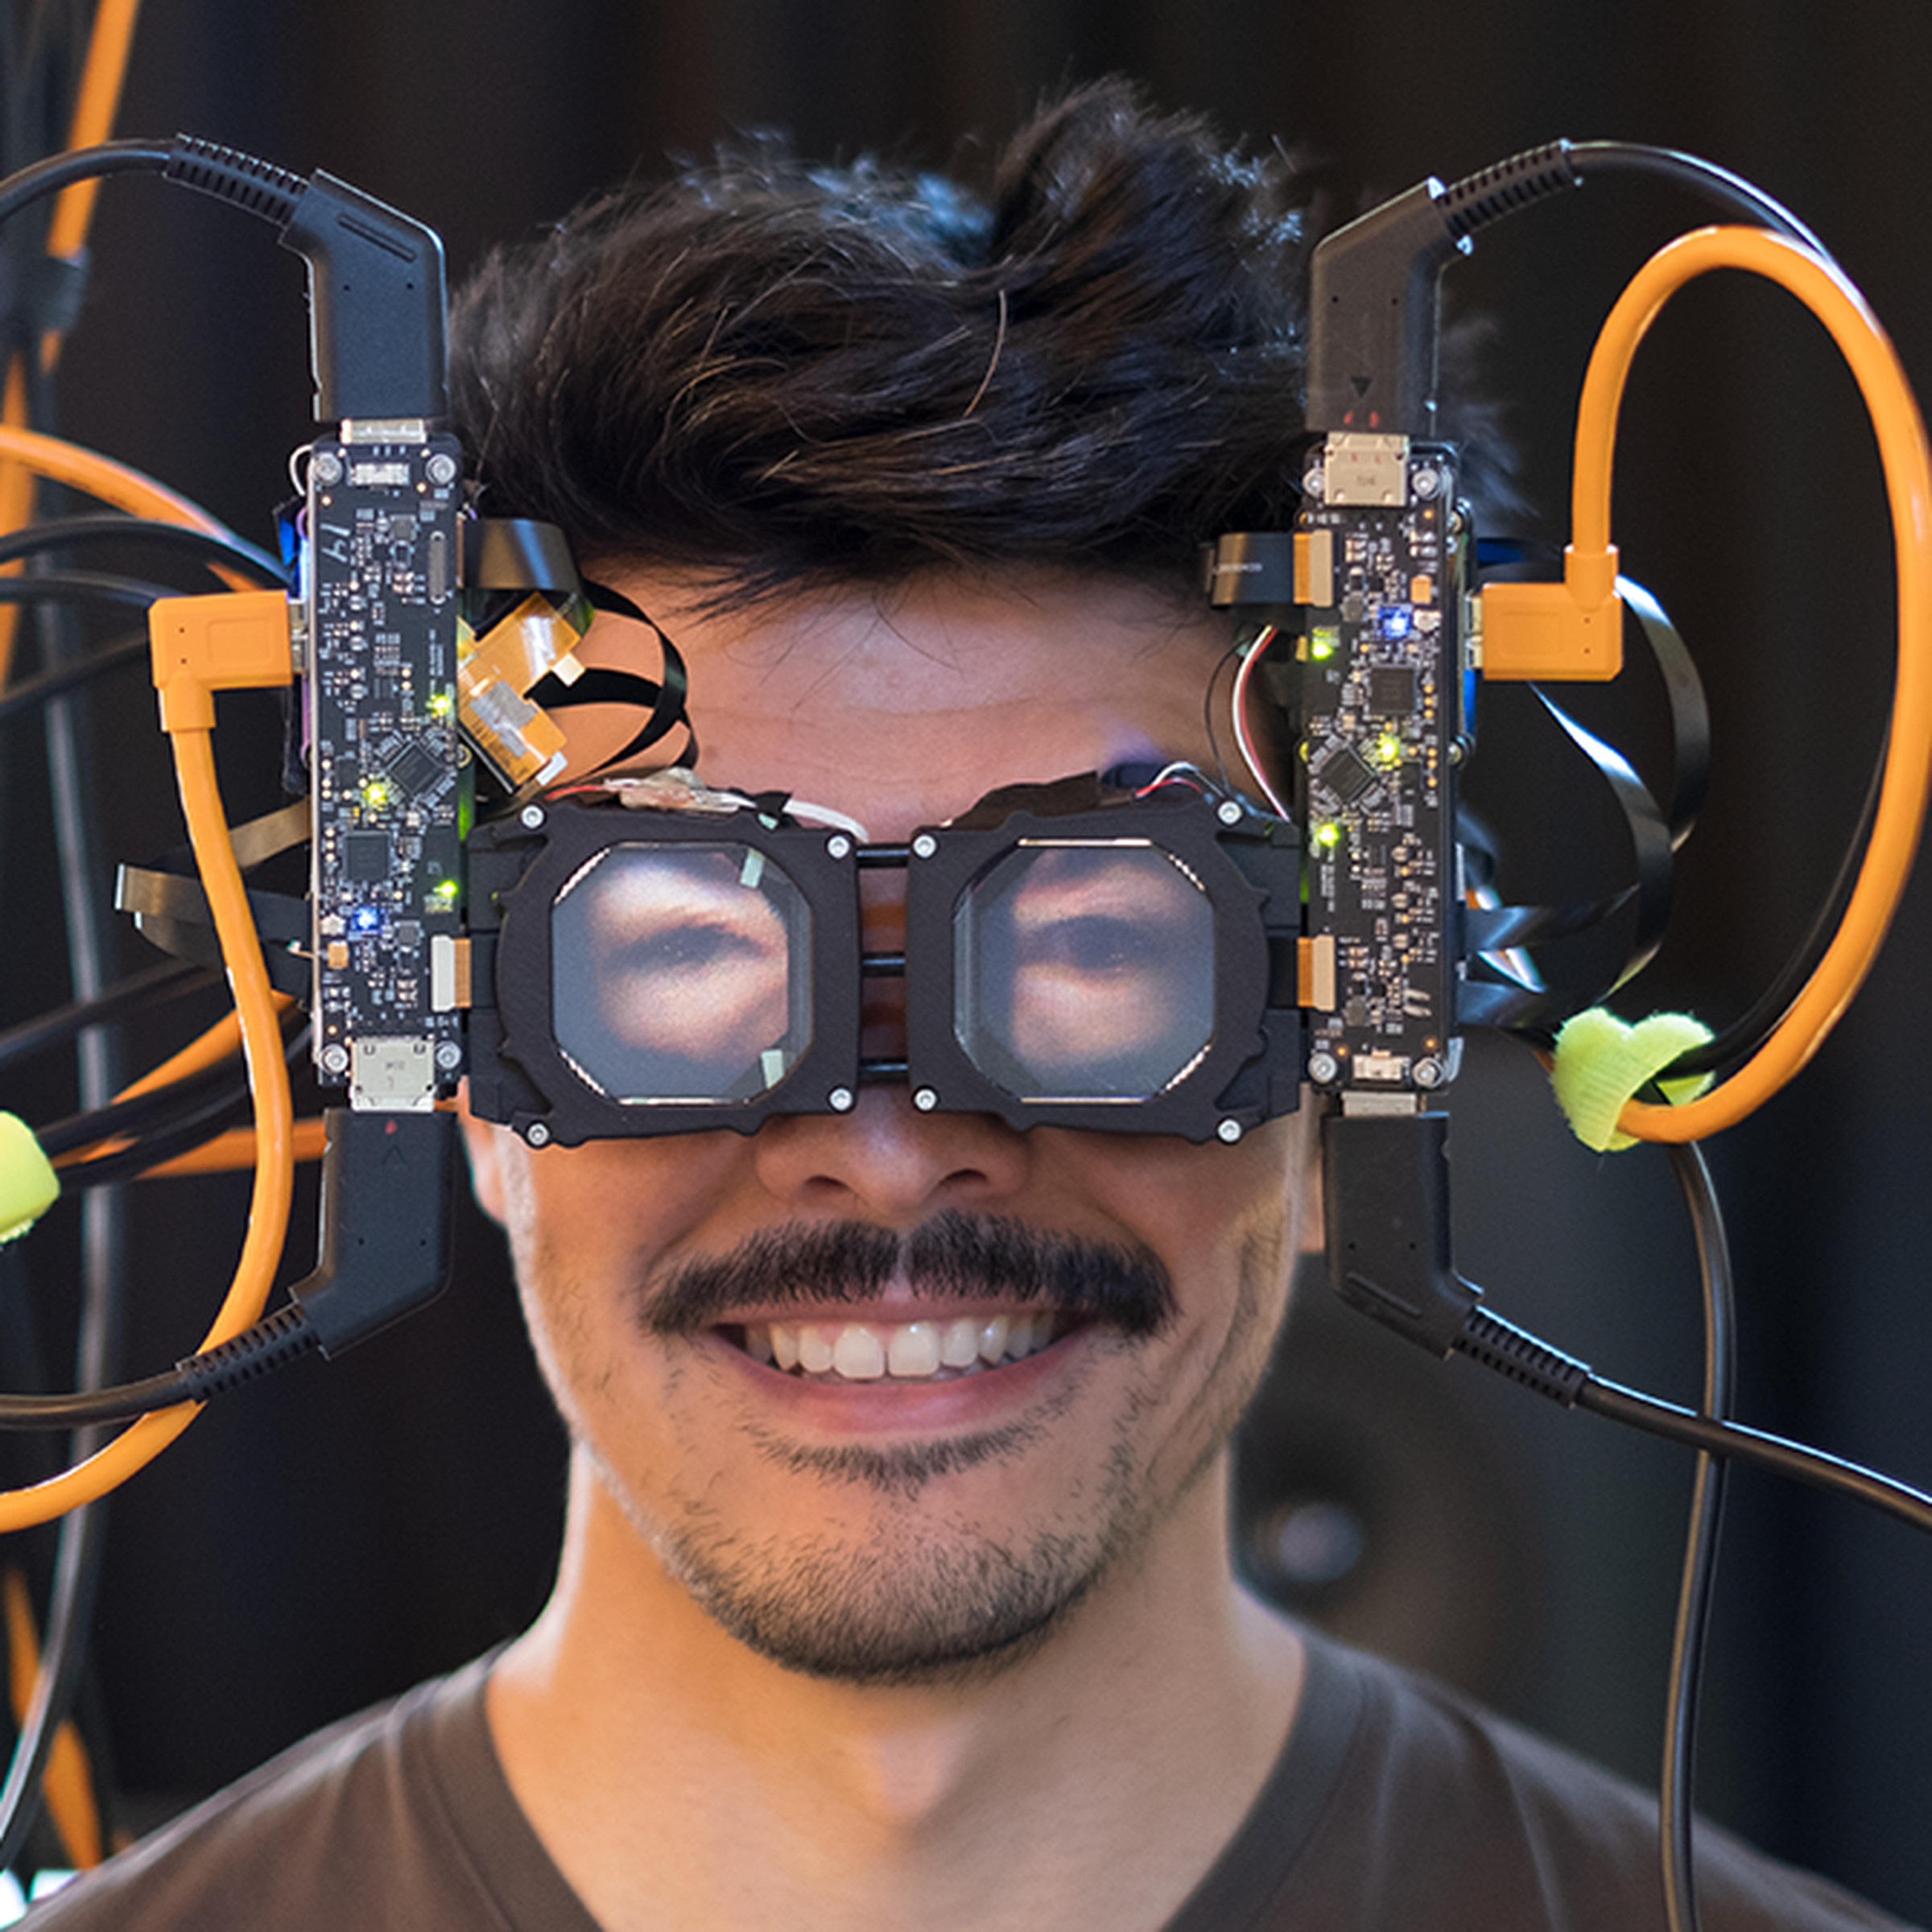 Facebook’s prototype for “reverse passthrough VR,” a system for creating the illusion of eye contact while wearing a VR headset.